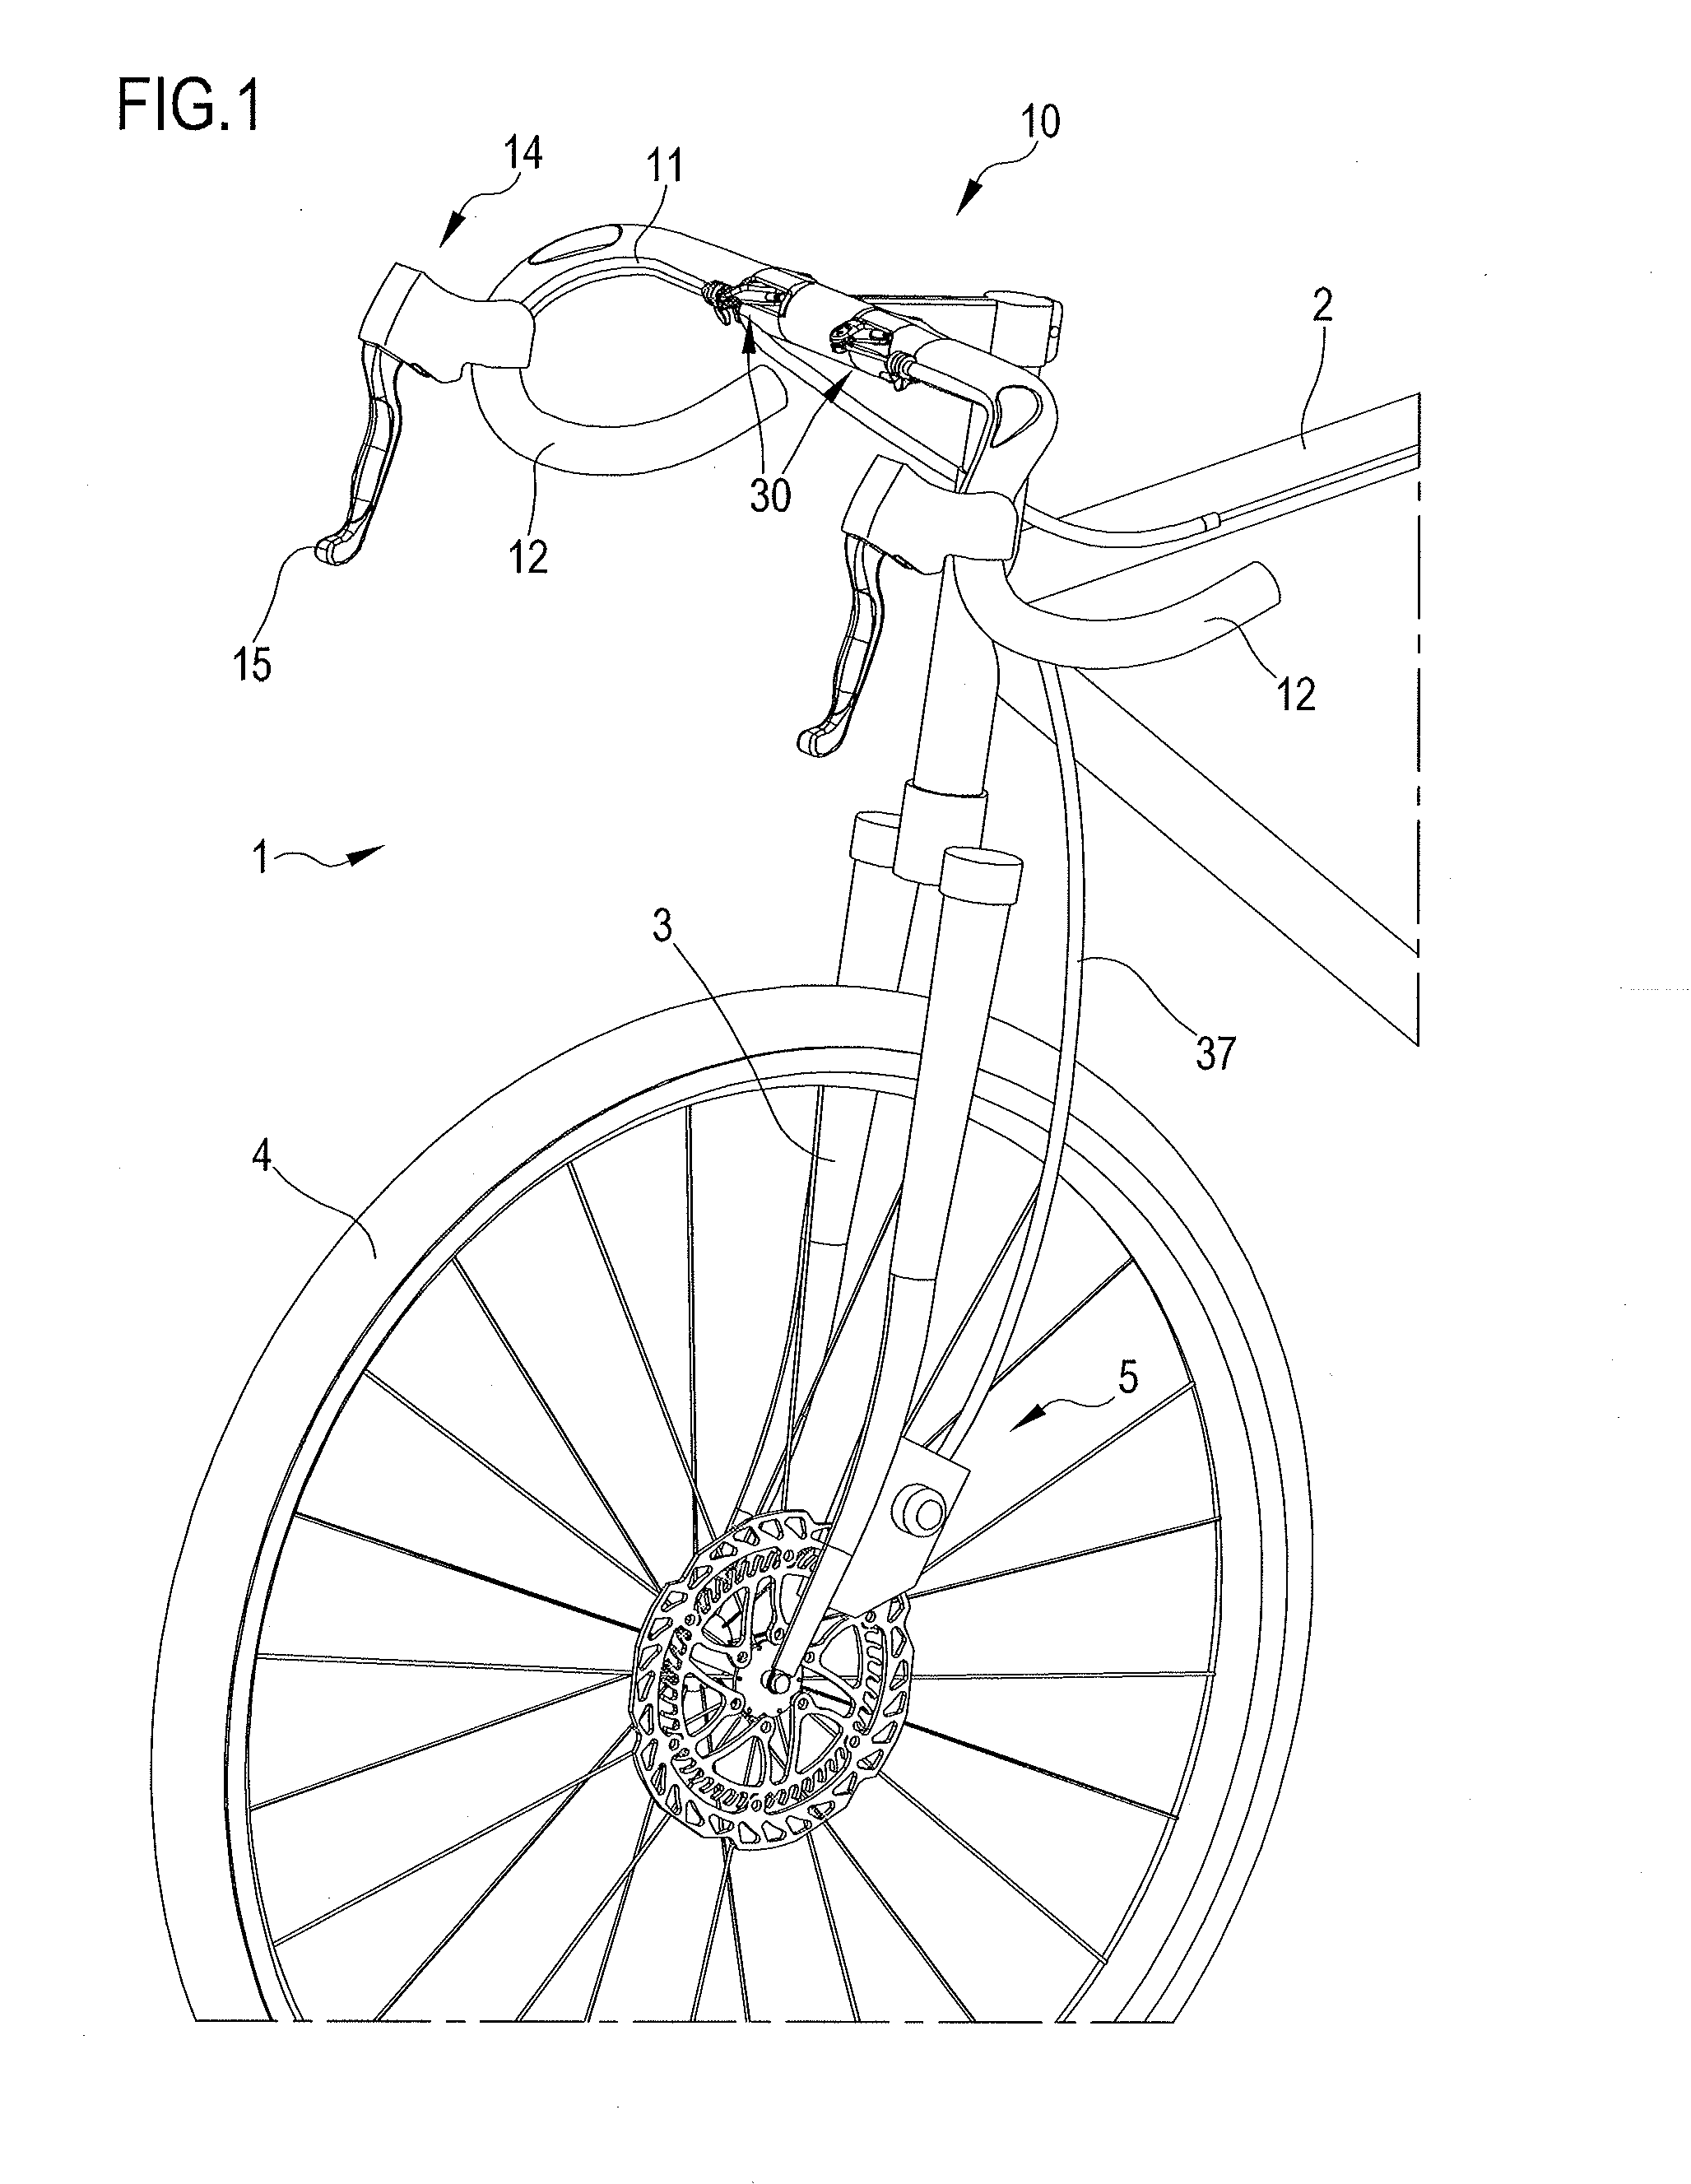 Bicycle handlebar assembly with integrated oleo-hydraulic controls